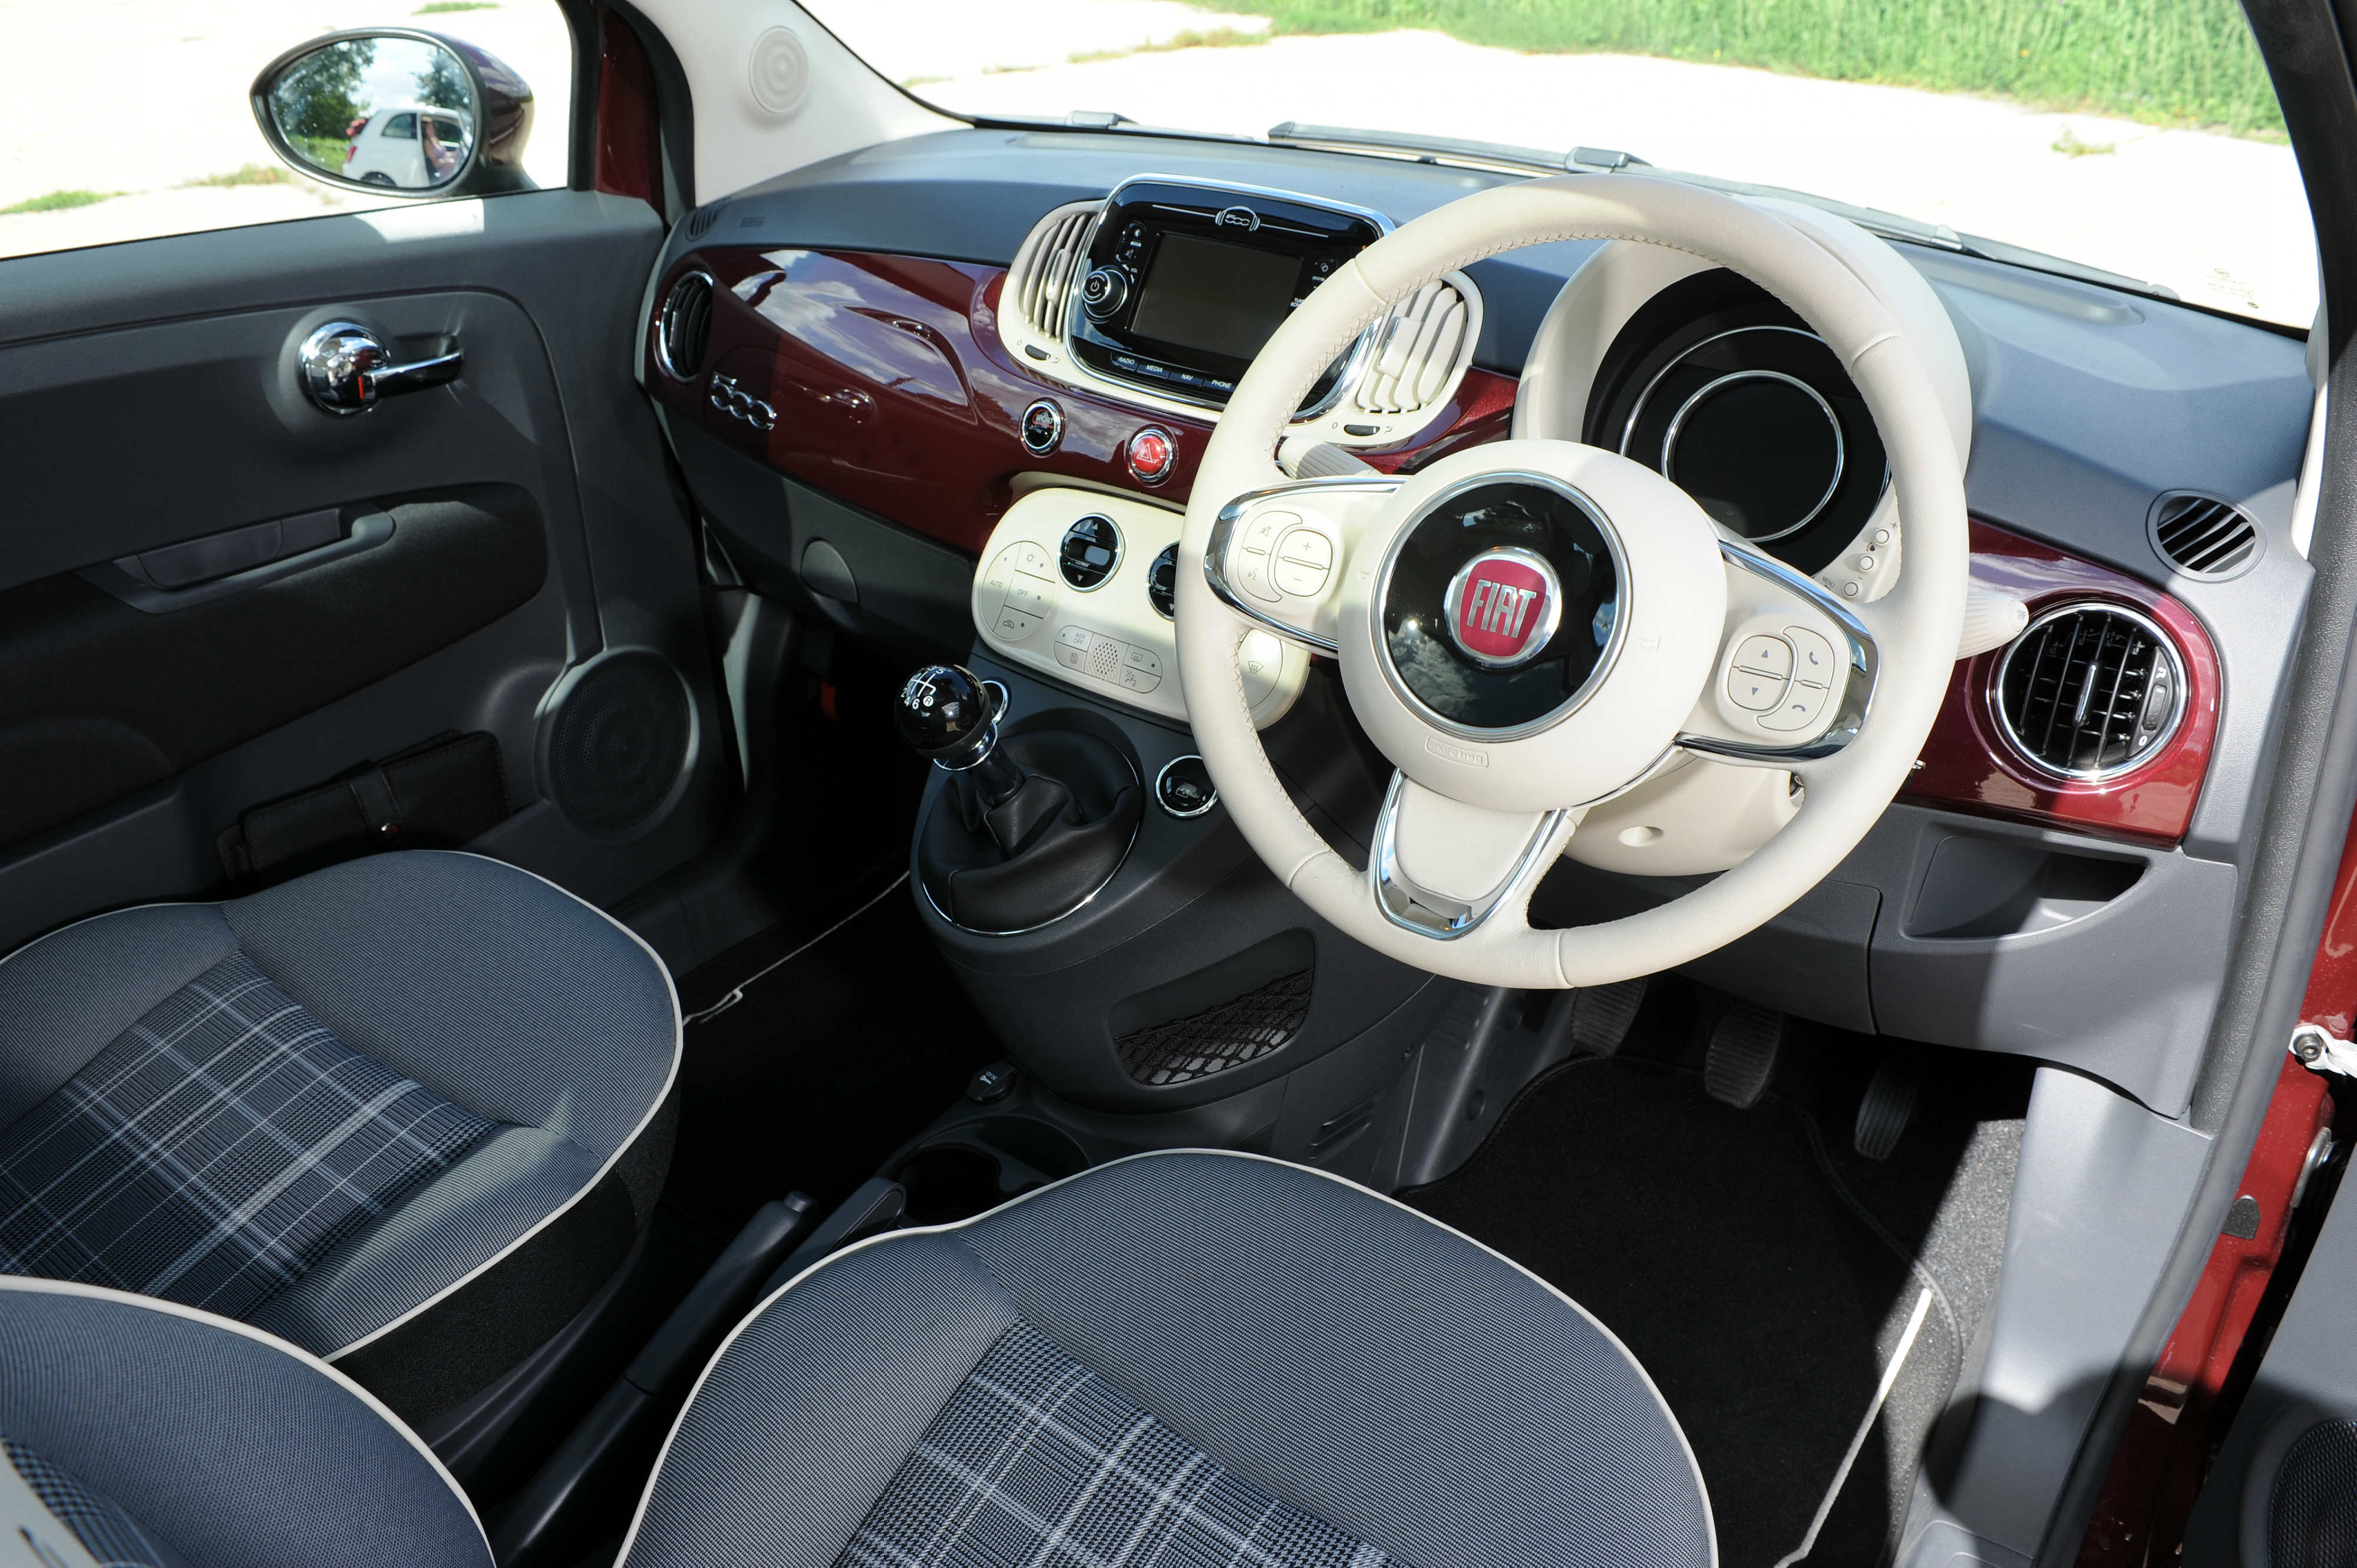 Review of the 2015 Fiat 500 Twin Air